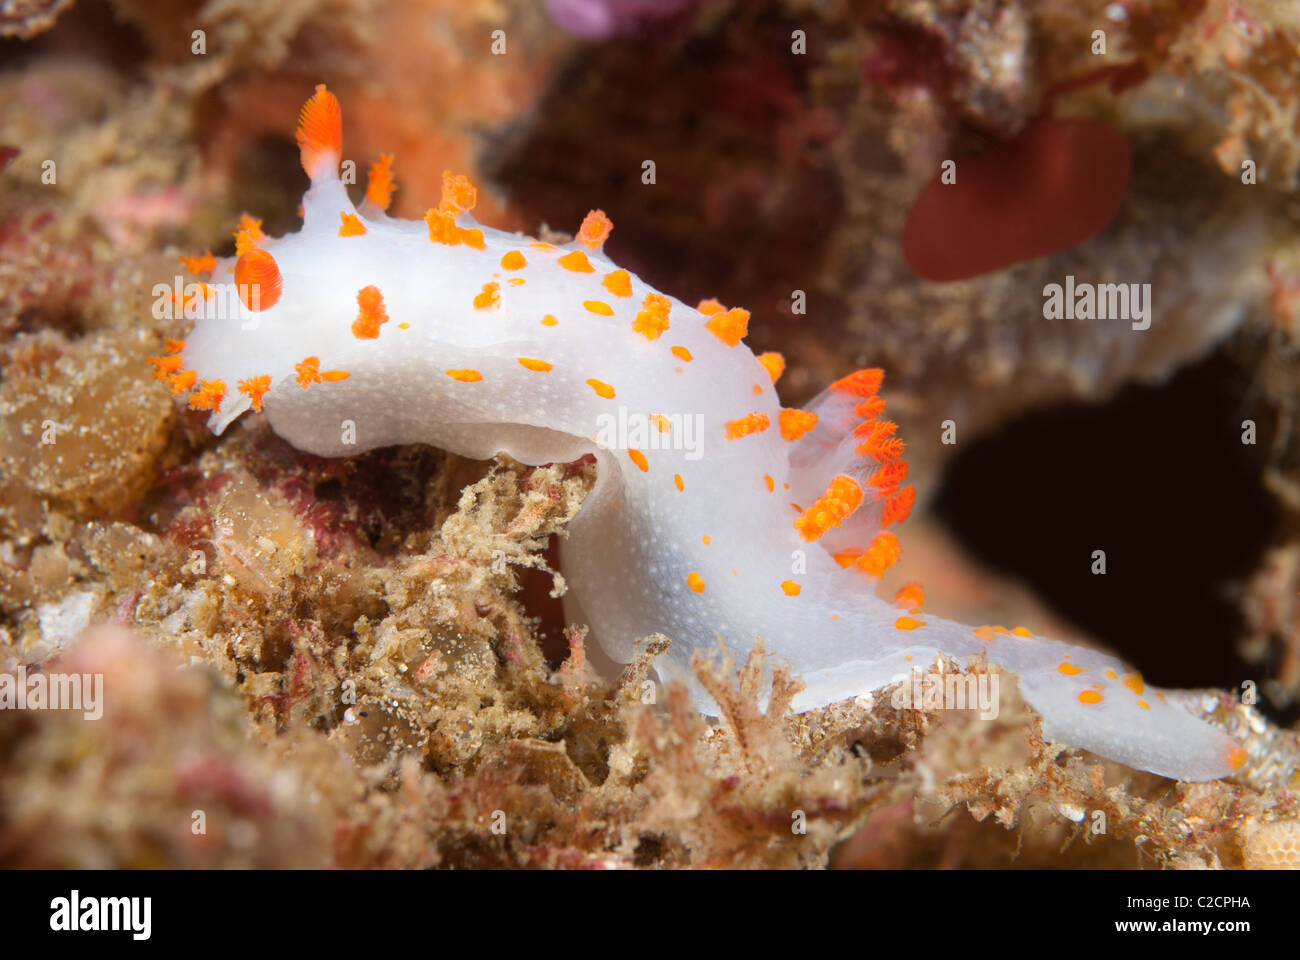 An orange and white clown nudibranch crawld along a reef off the coast of California. Stock Photo